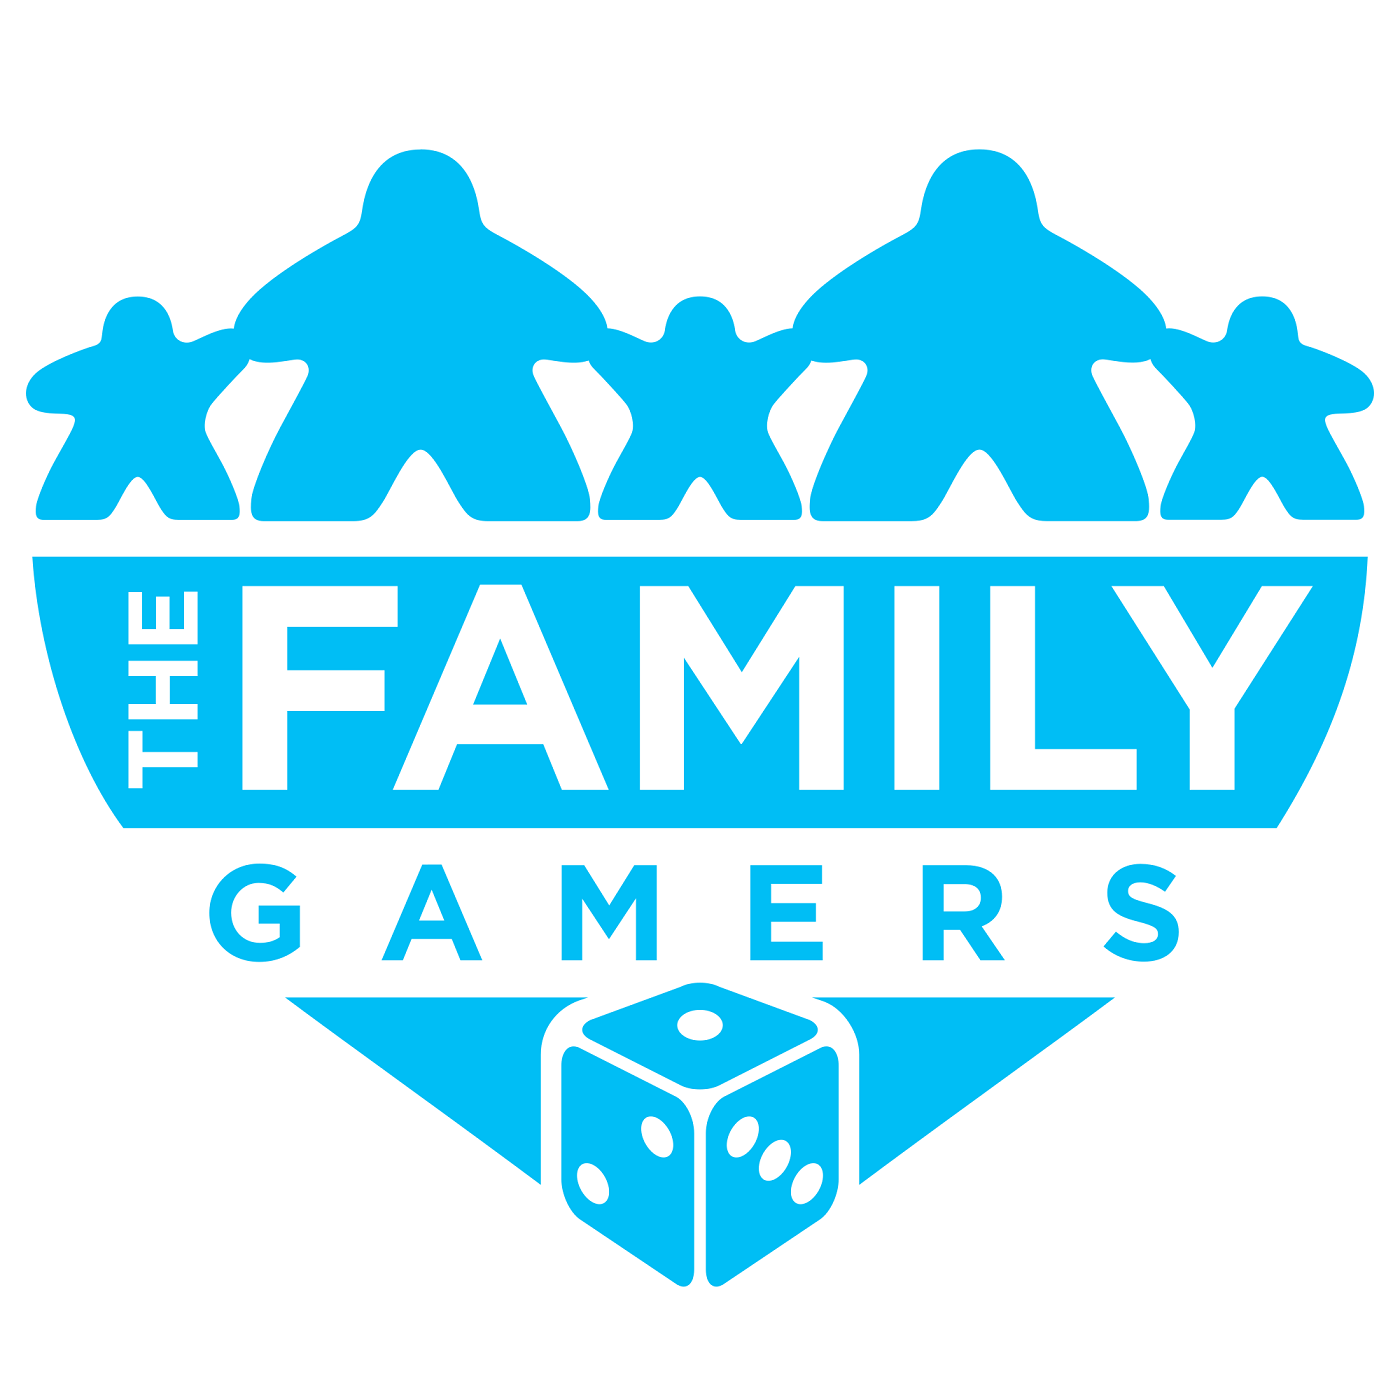 The Family Gamers Podcast